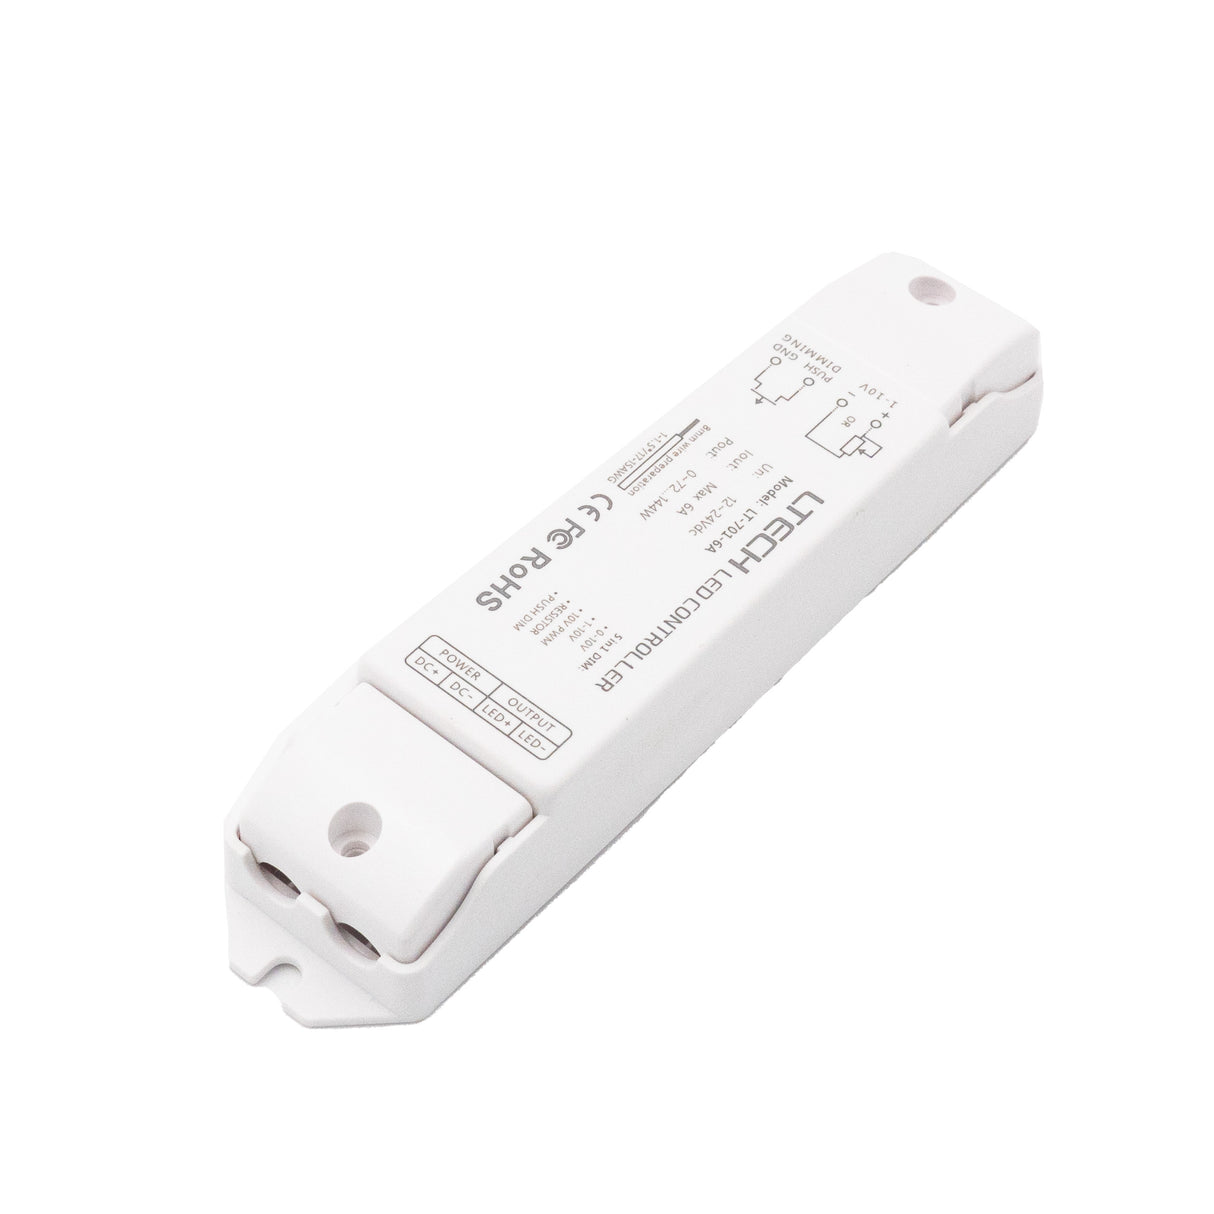 Ltech LT-701-6A Constant Voltage Controller - 0-10V/Push Dimmable